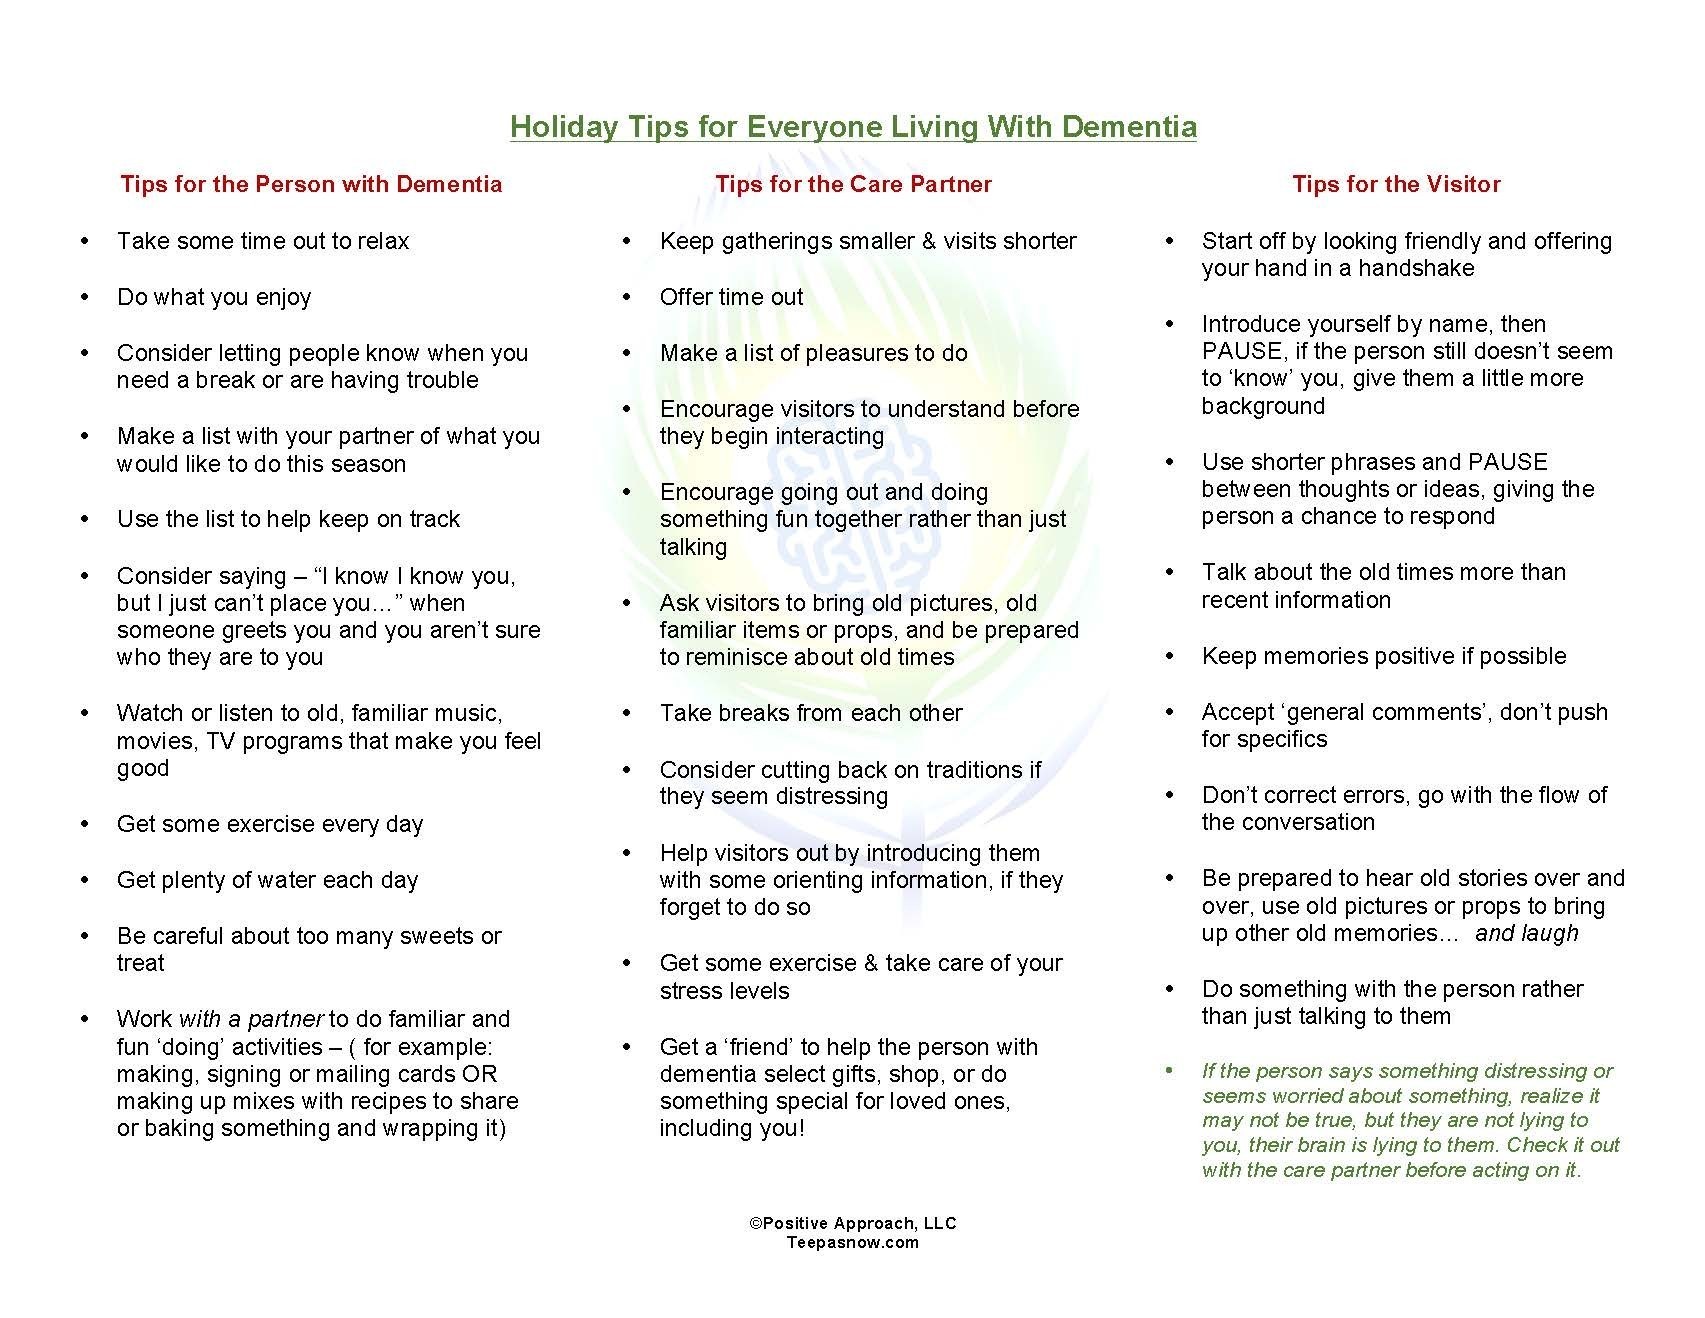 Dementia Holiday Tips (2)